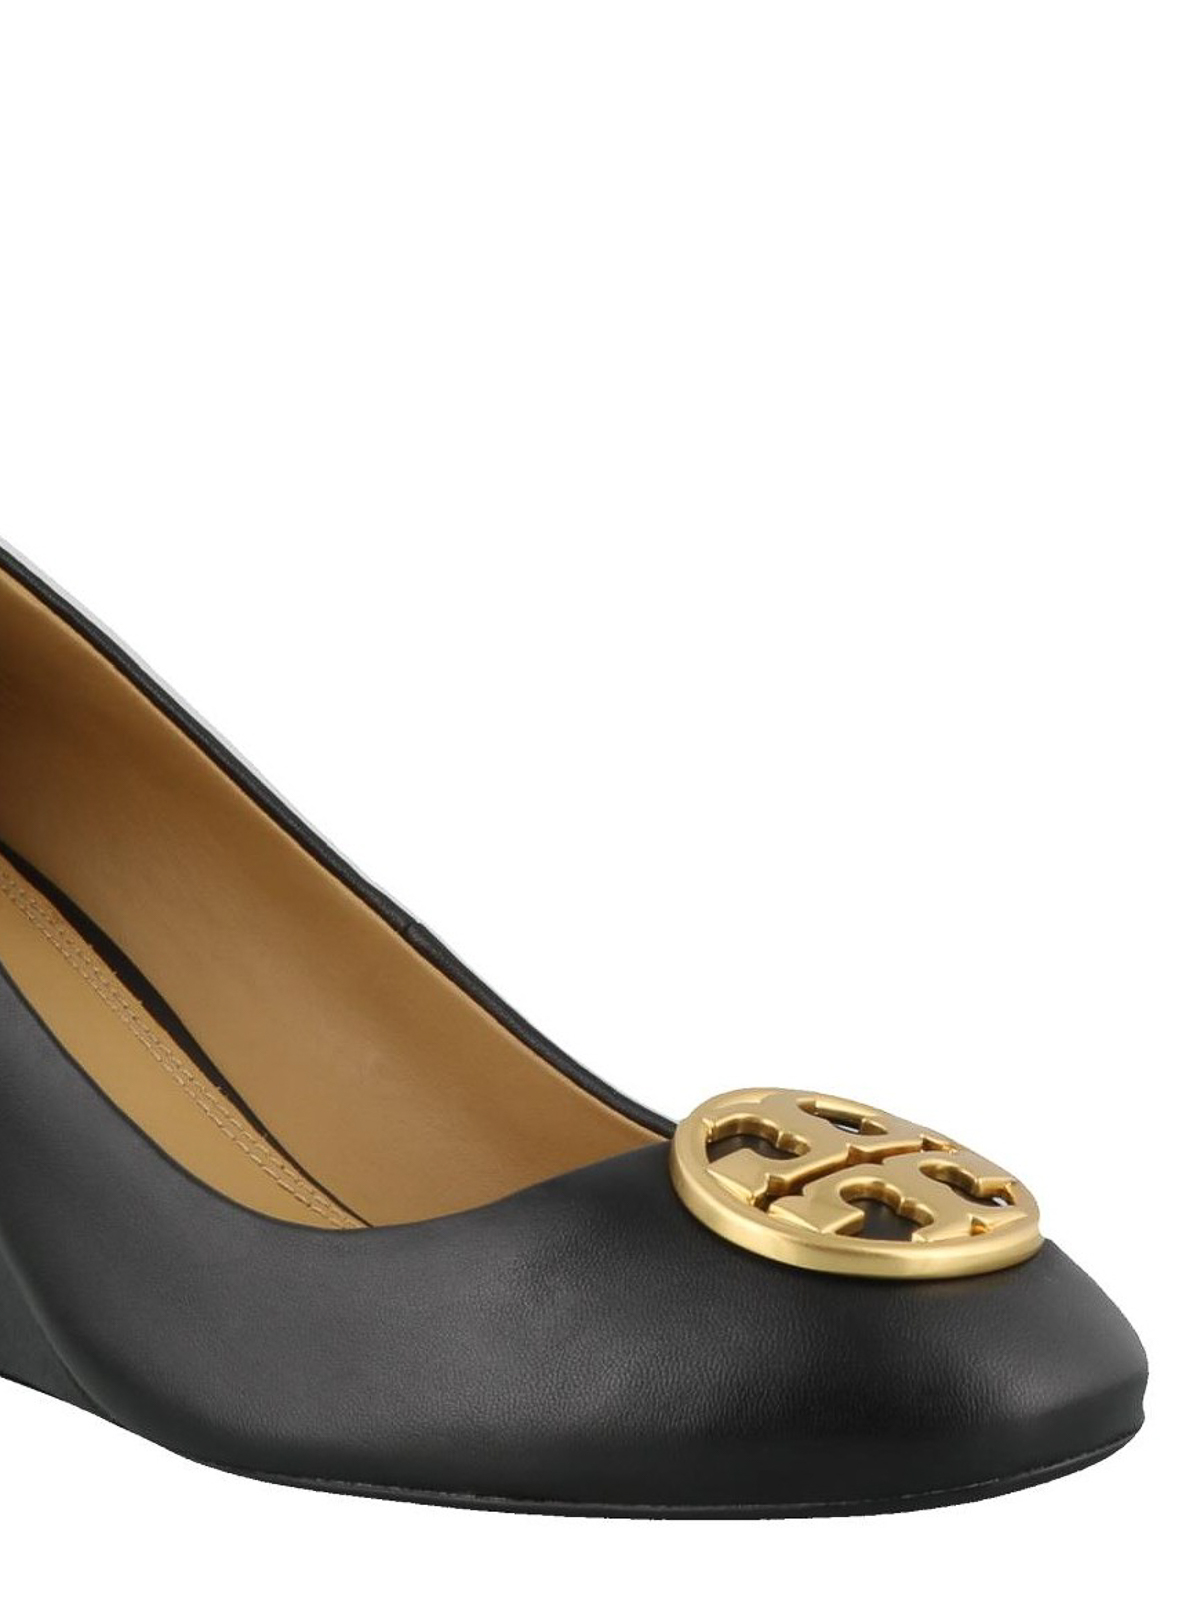 Tory Burch - Chelsea leather wedge pumps - court shoes - 45899006